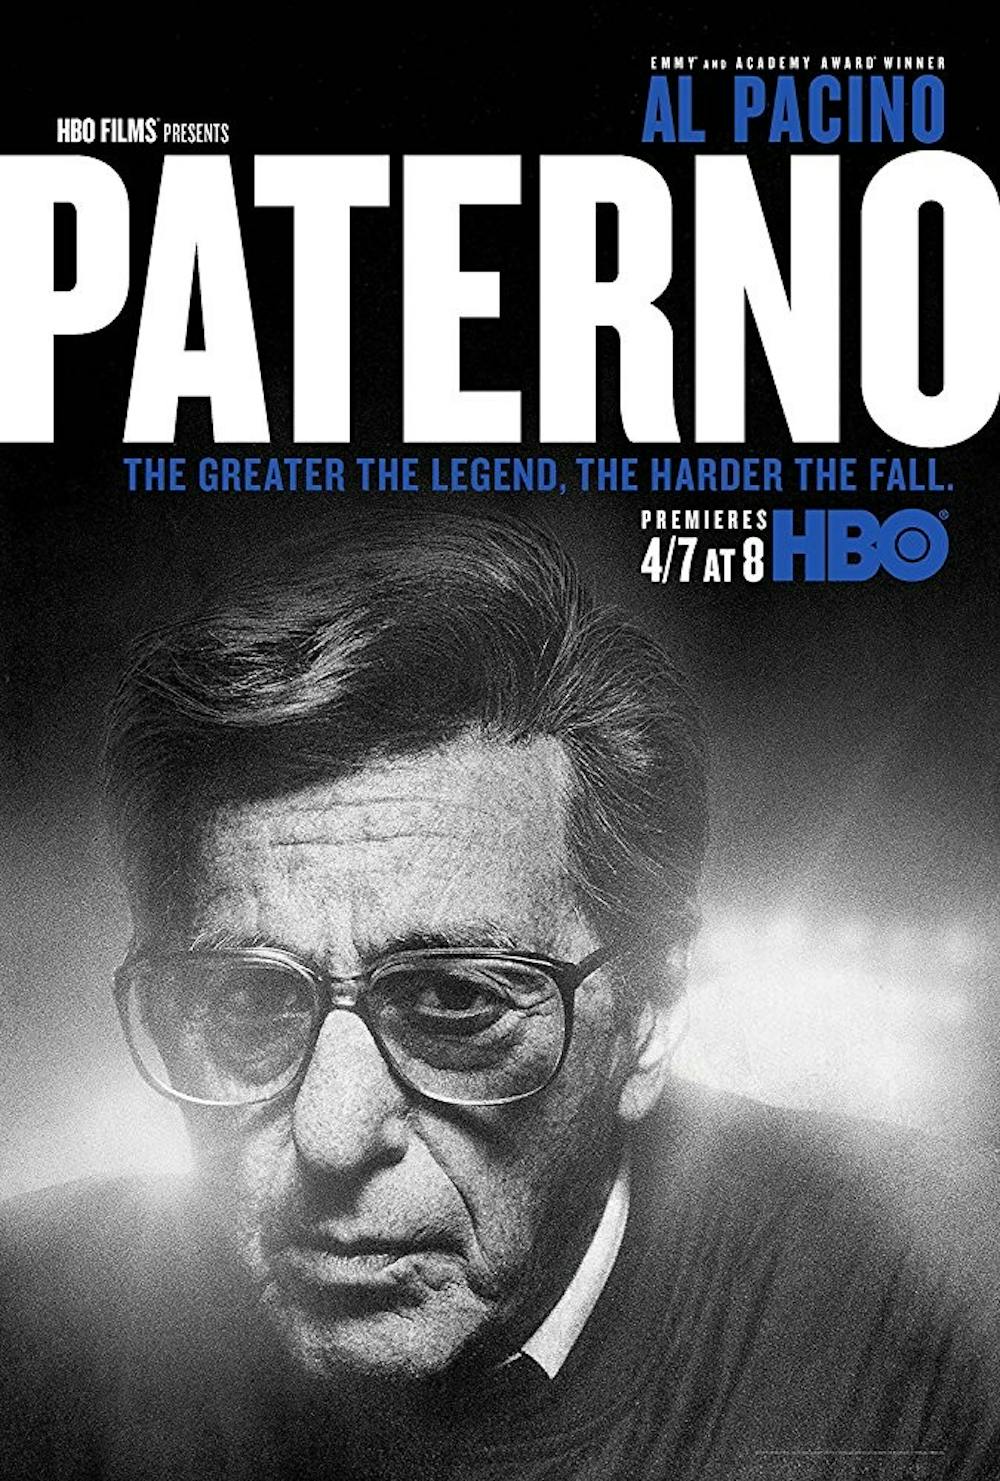 <p>HBO's "Paterno" is a grim, complicated biopic dealing with the life of a Penn State football coach involved in the school's child abuse scandal.</p>